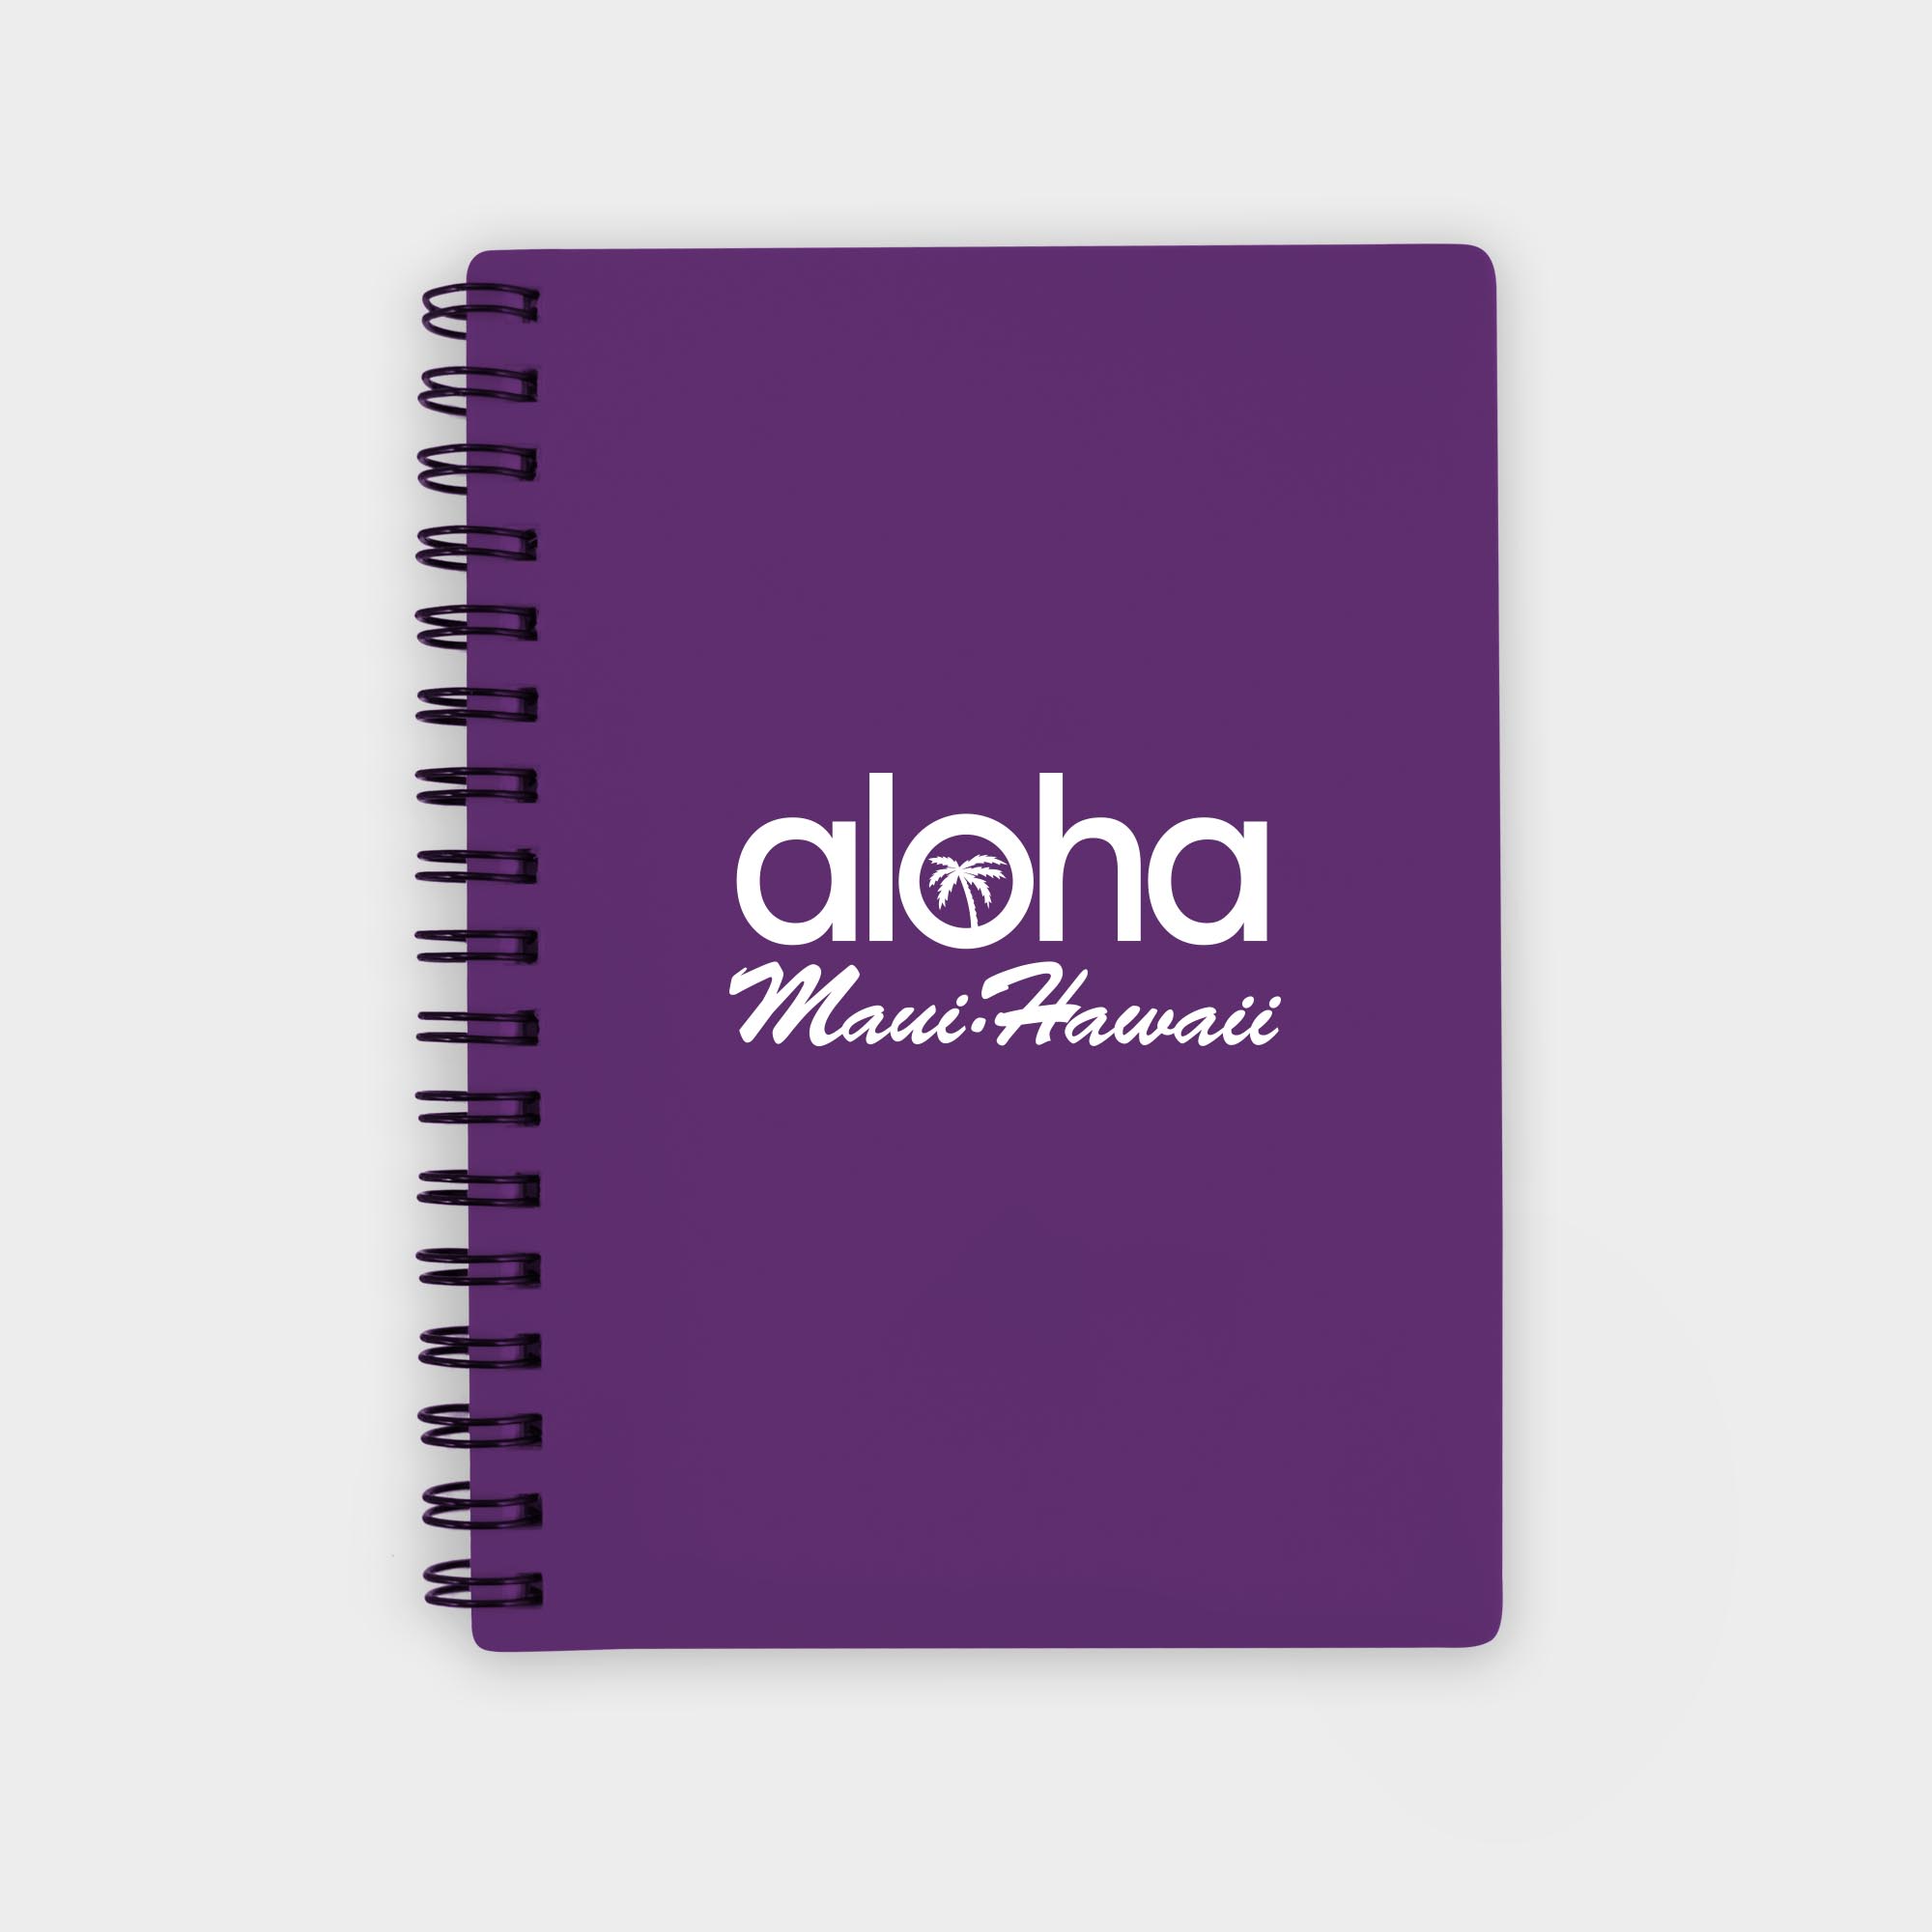 The Green & Good Polypropylene Notebook comes with recycled paper - size A6. The front and back cover is made from recycled polypropylene (500 microns), the sheets are 80gsm. Comes wirebound with 50 sheets as standard. Please contact us if you require a bespoke number of sheets. Purple